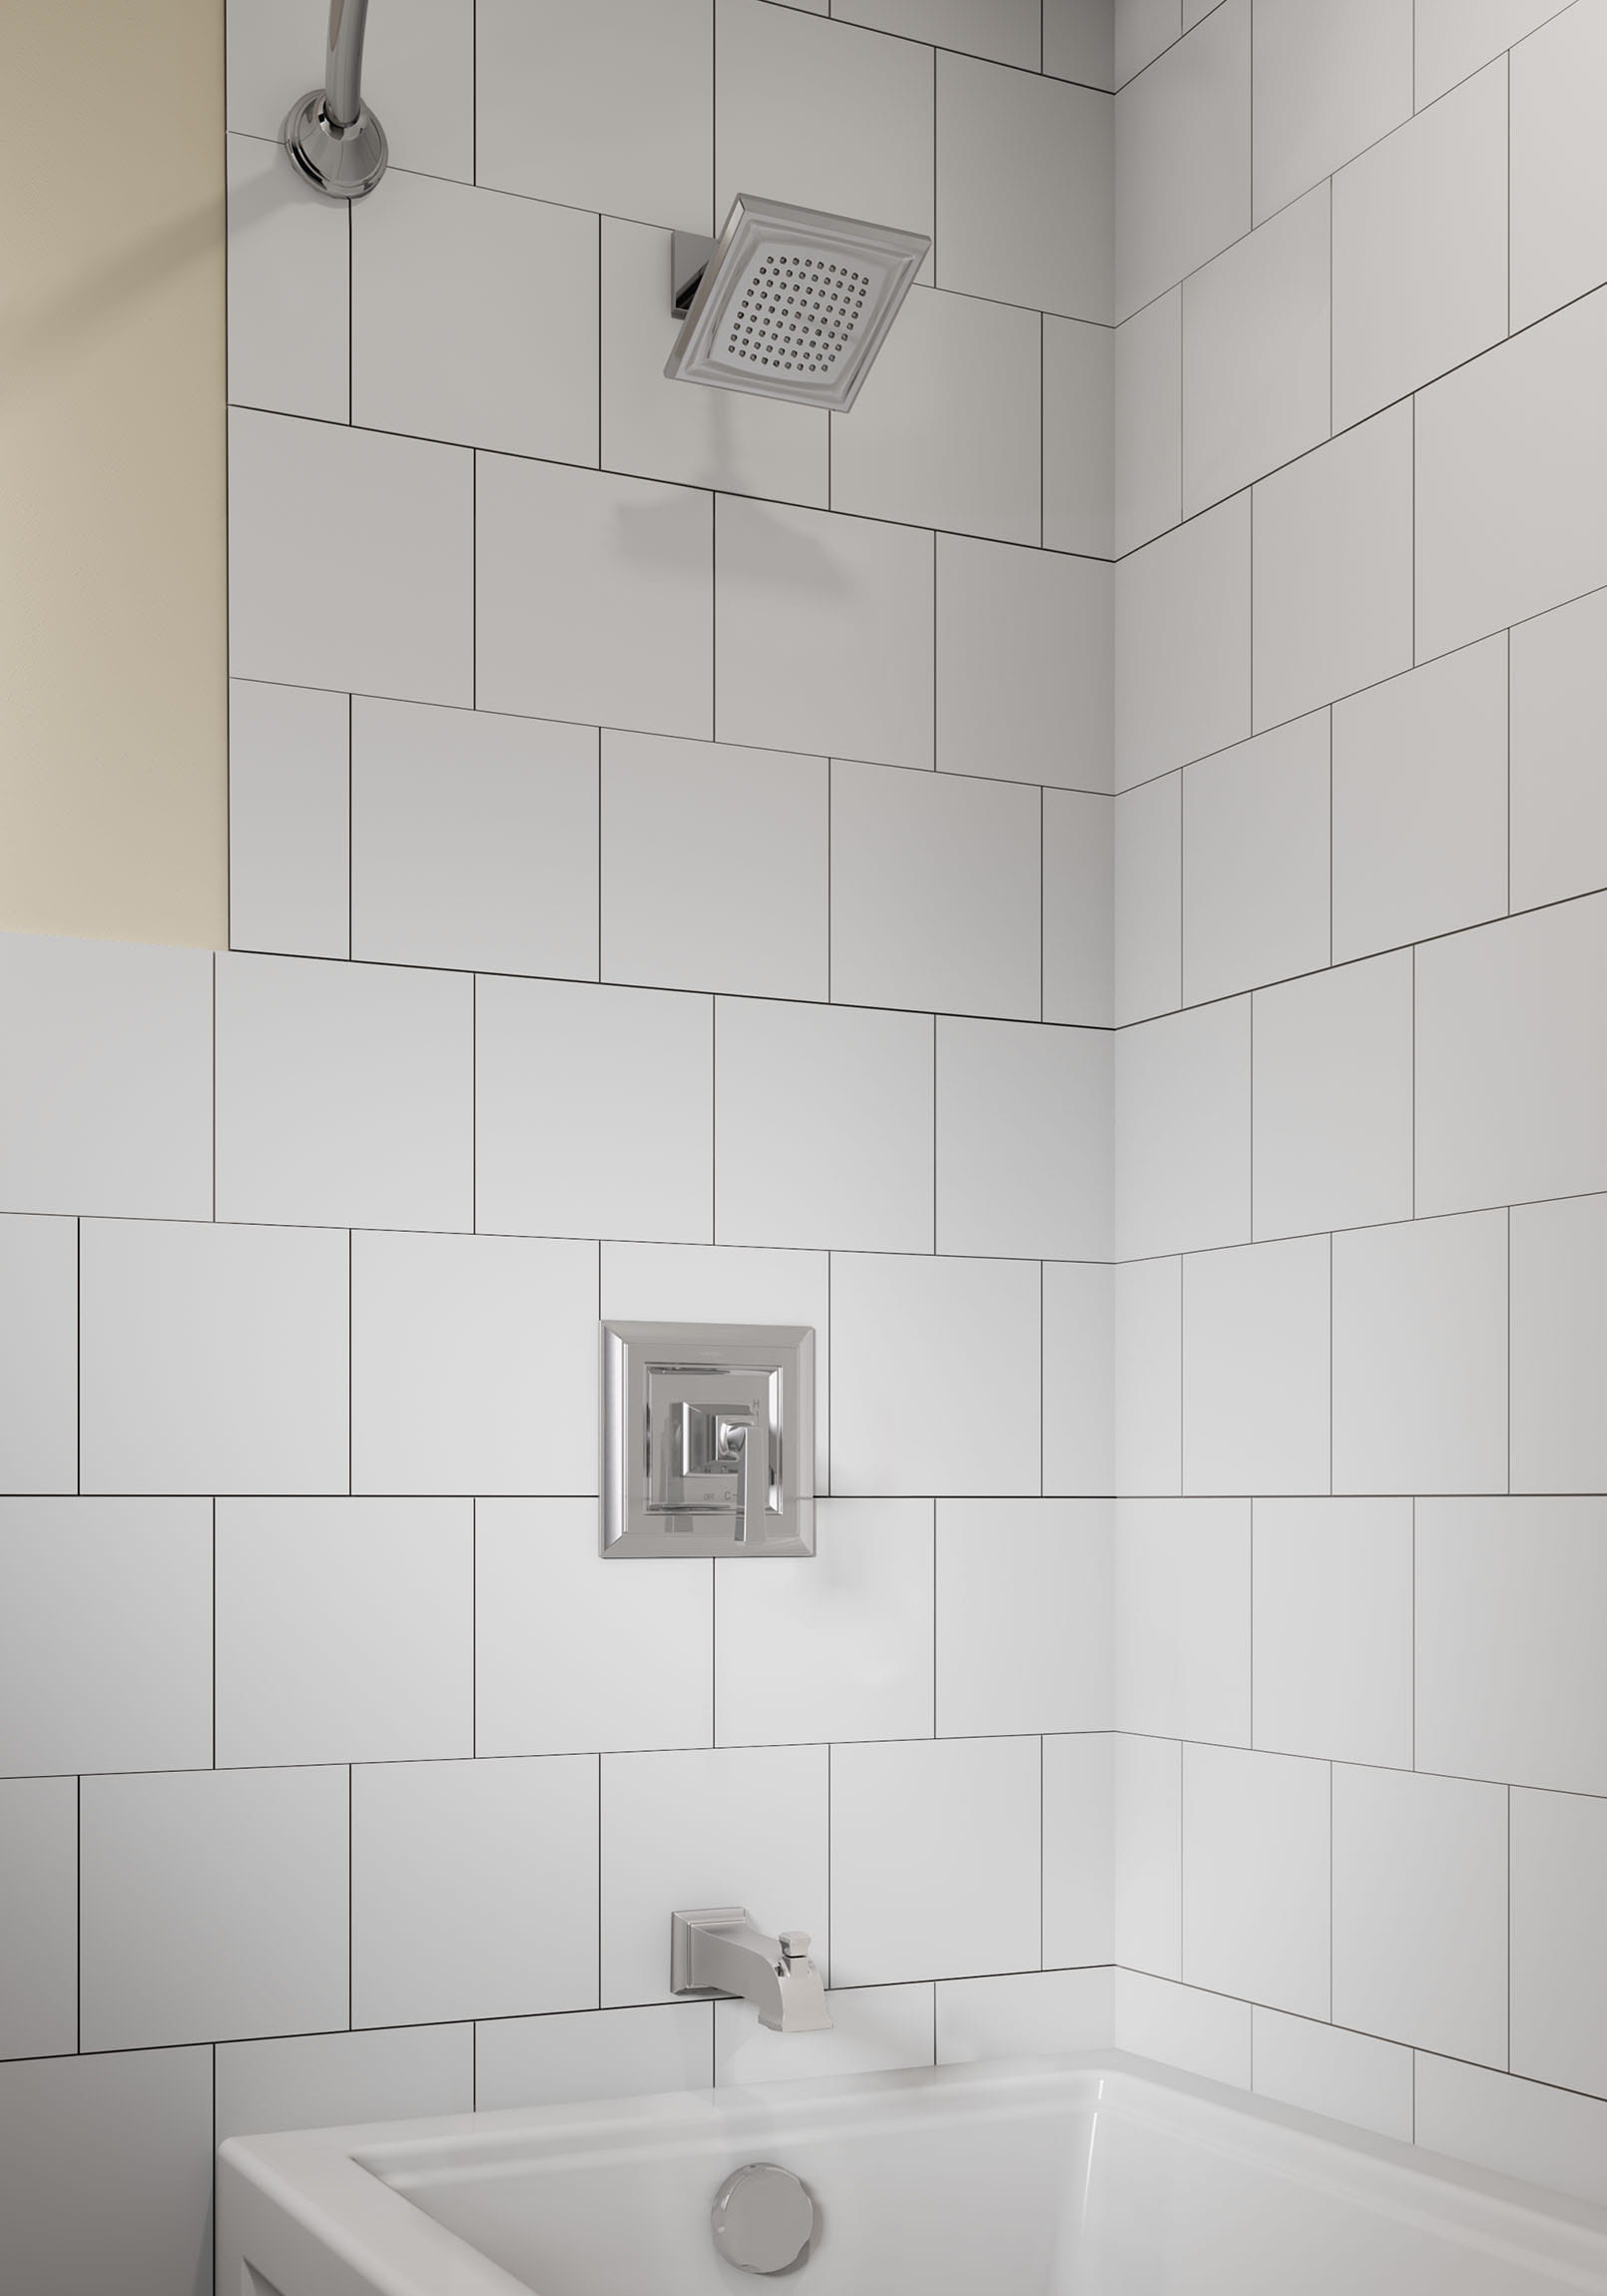 Town Square® S 2.5 gpm/9.5 L/min Tub and Shower Trim Kit With Single Function Showerhead, Double Ceramic Pressure Balance Cartridge With Lever Handle